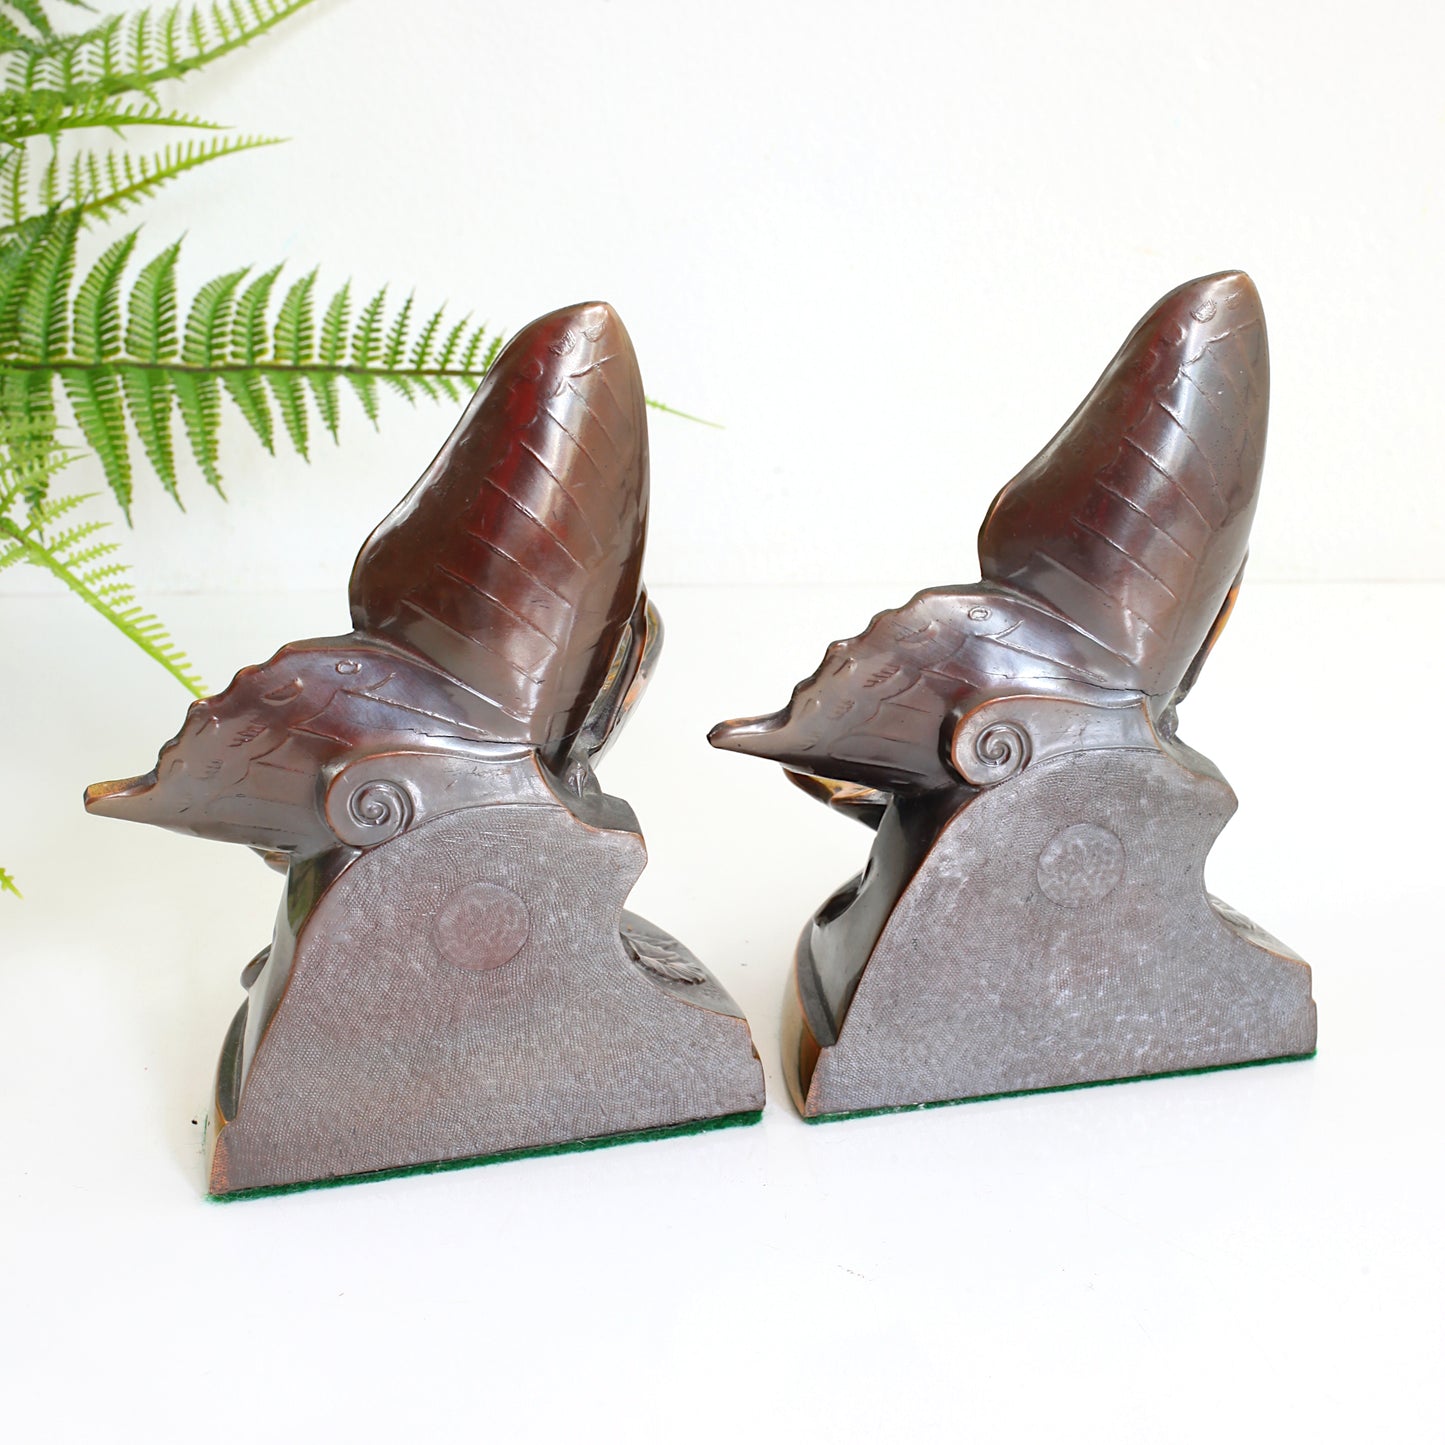 SOLD - Vintage Bronze Butterfly Bookends